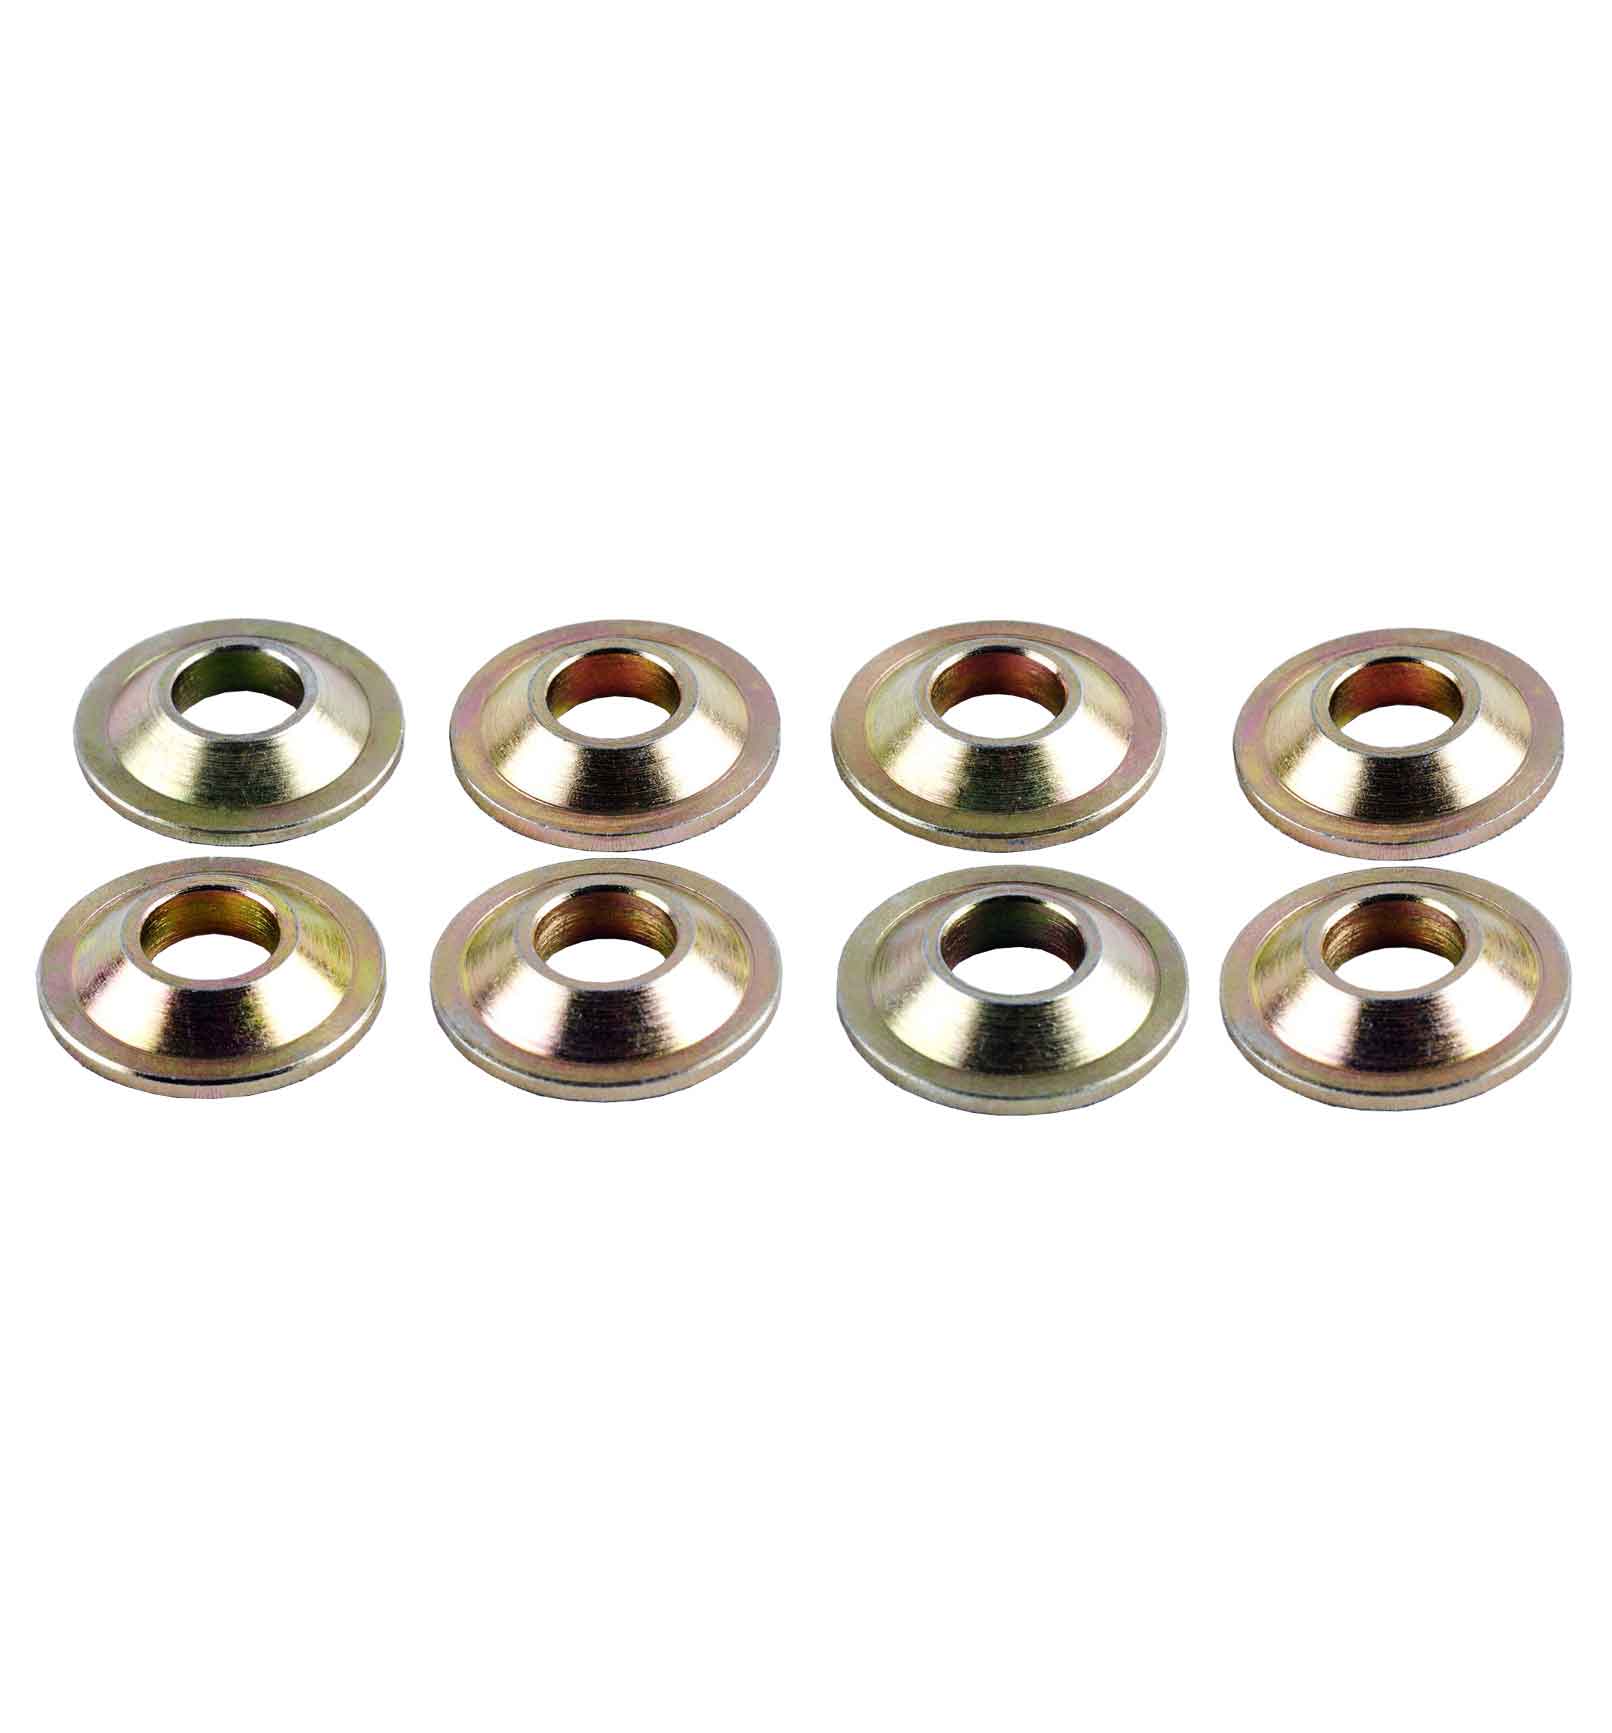 M8 Rod End Misalignment Spacers 8mm (Pack of 8)